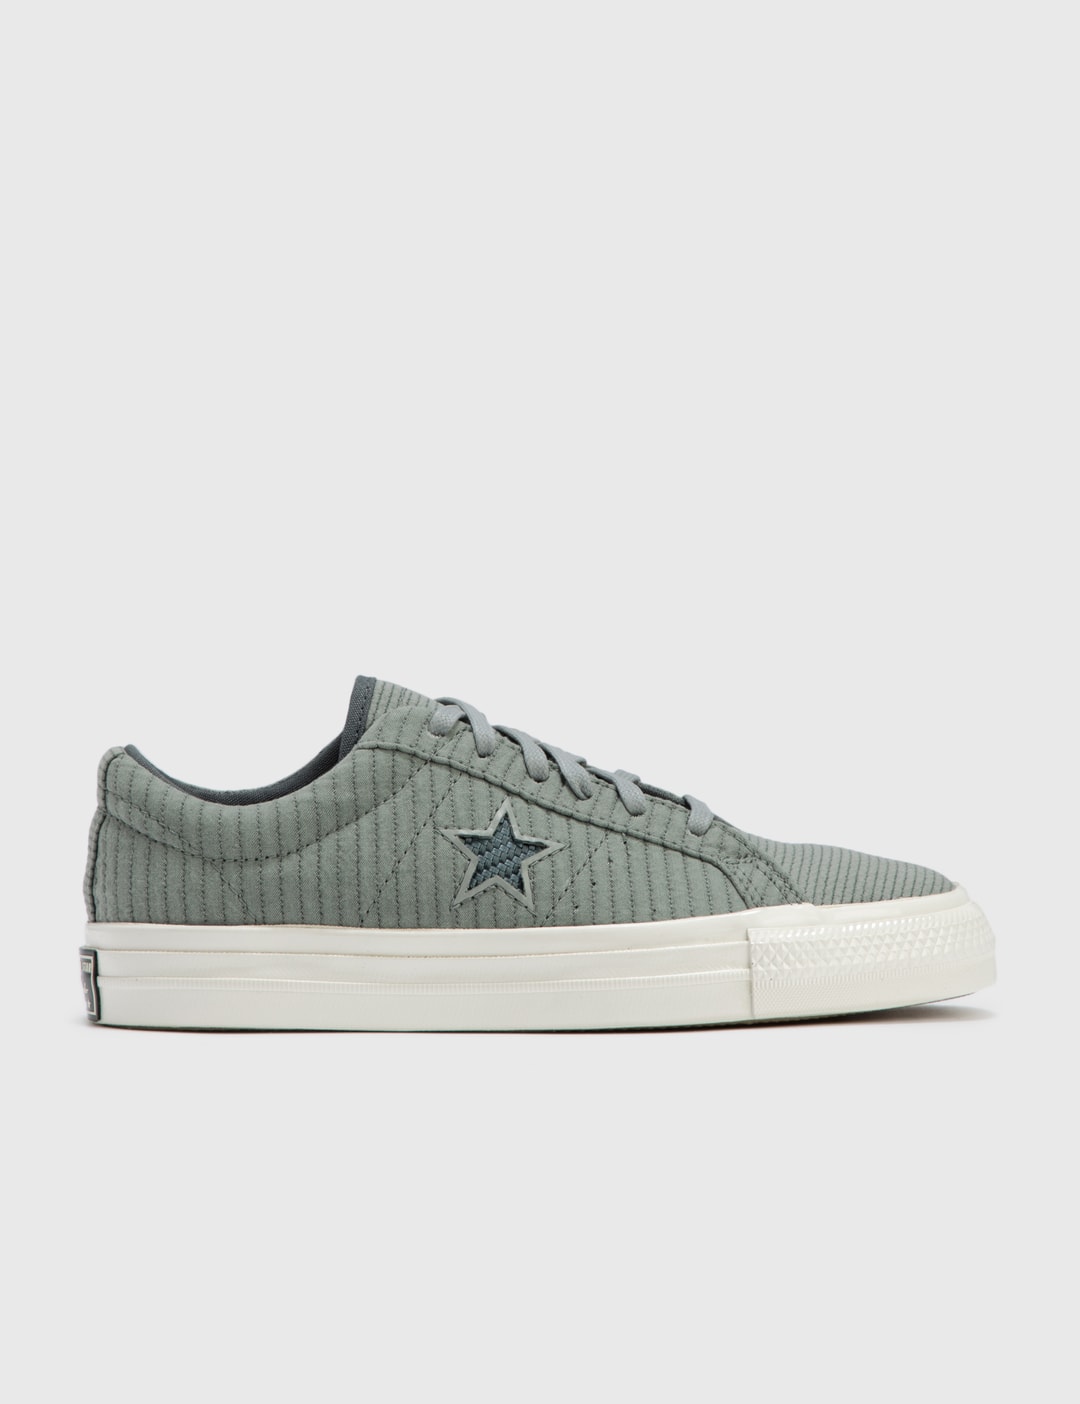 Antagonismo Condición previa Imbécil Converse - One Star | HBX - Globally Curated Fashion and Lifestyle by  Hypebeast